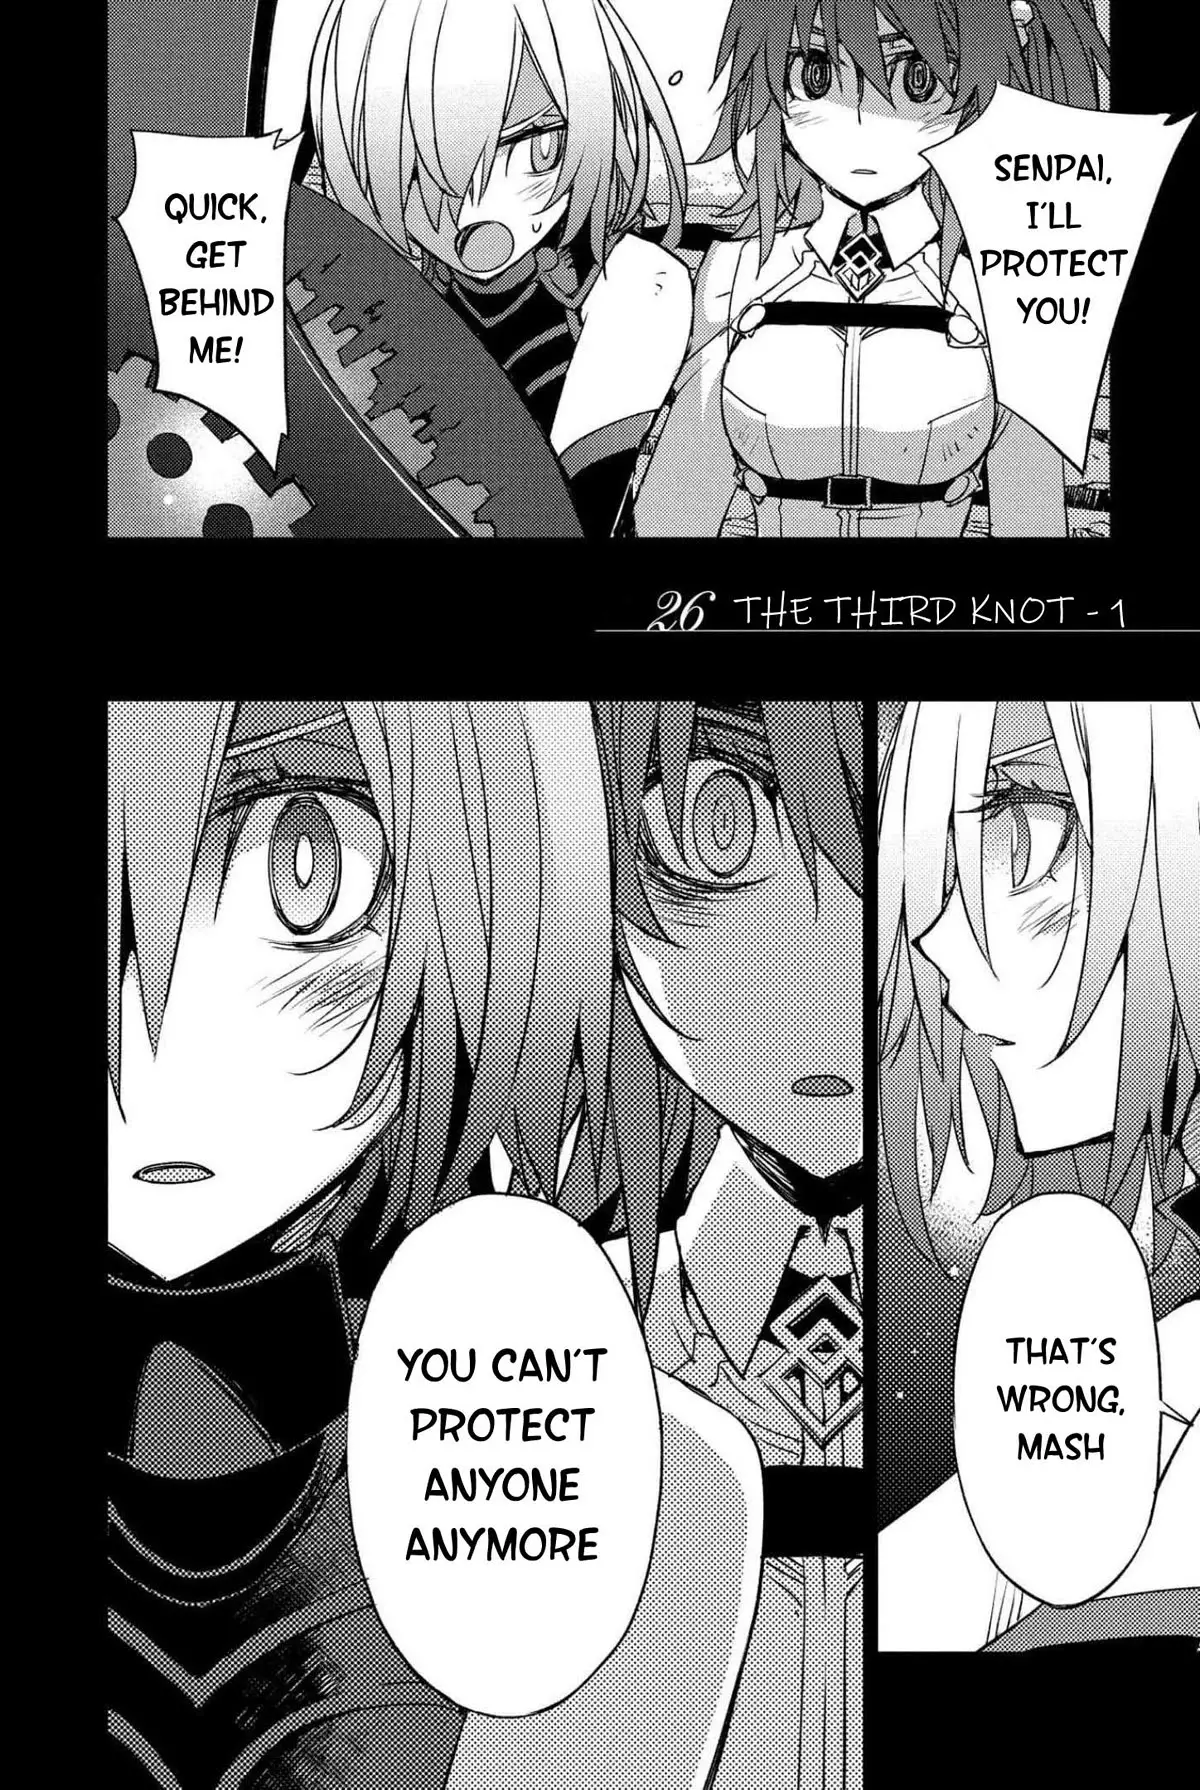 Fate/grand Order: Epic Of Remnant - Subspecies Singularity Iv: Taboo Advent Salem: Salem Of Heresy - 26 page 2-f465ec7d